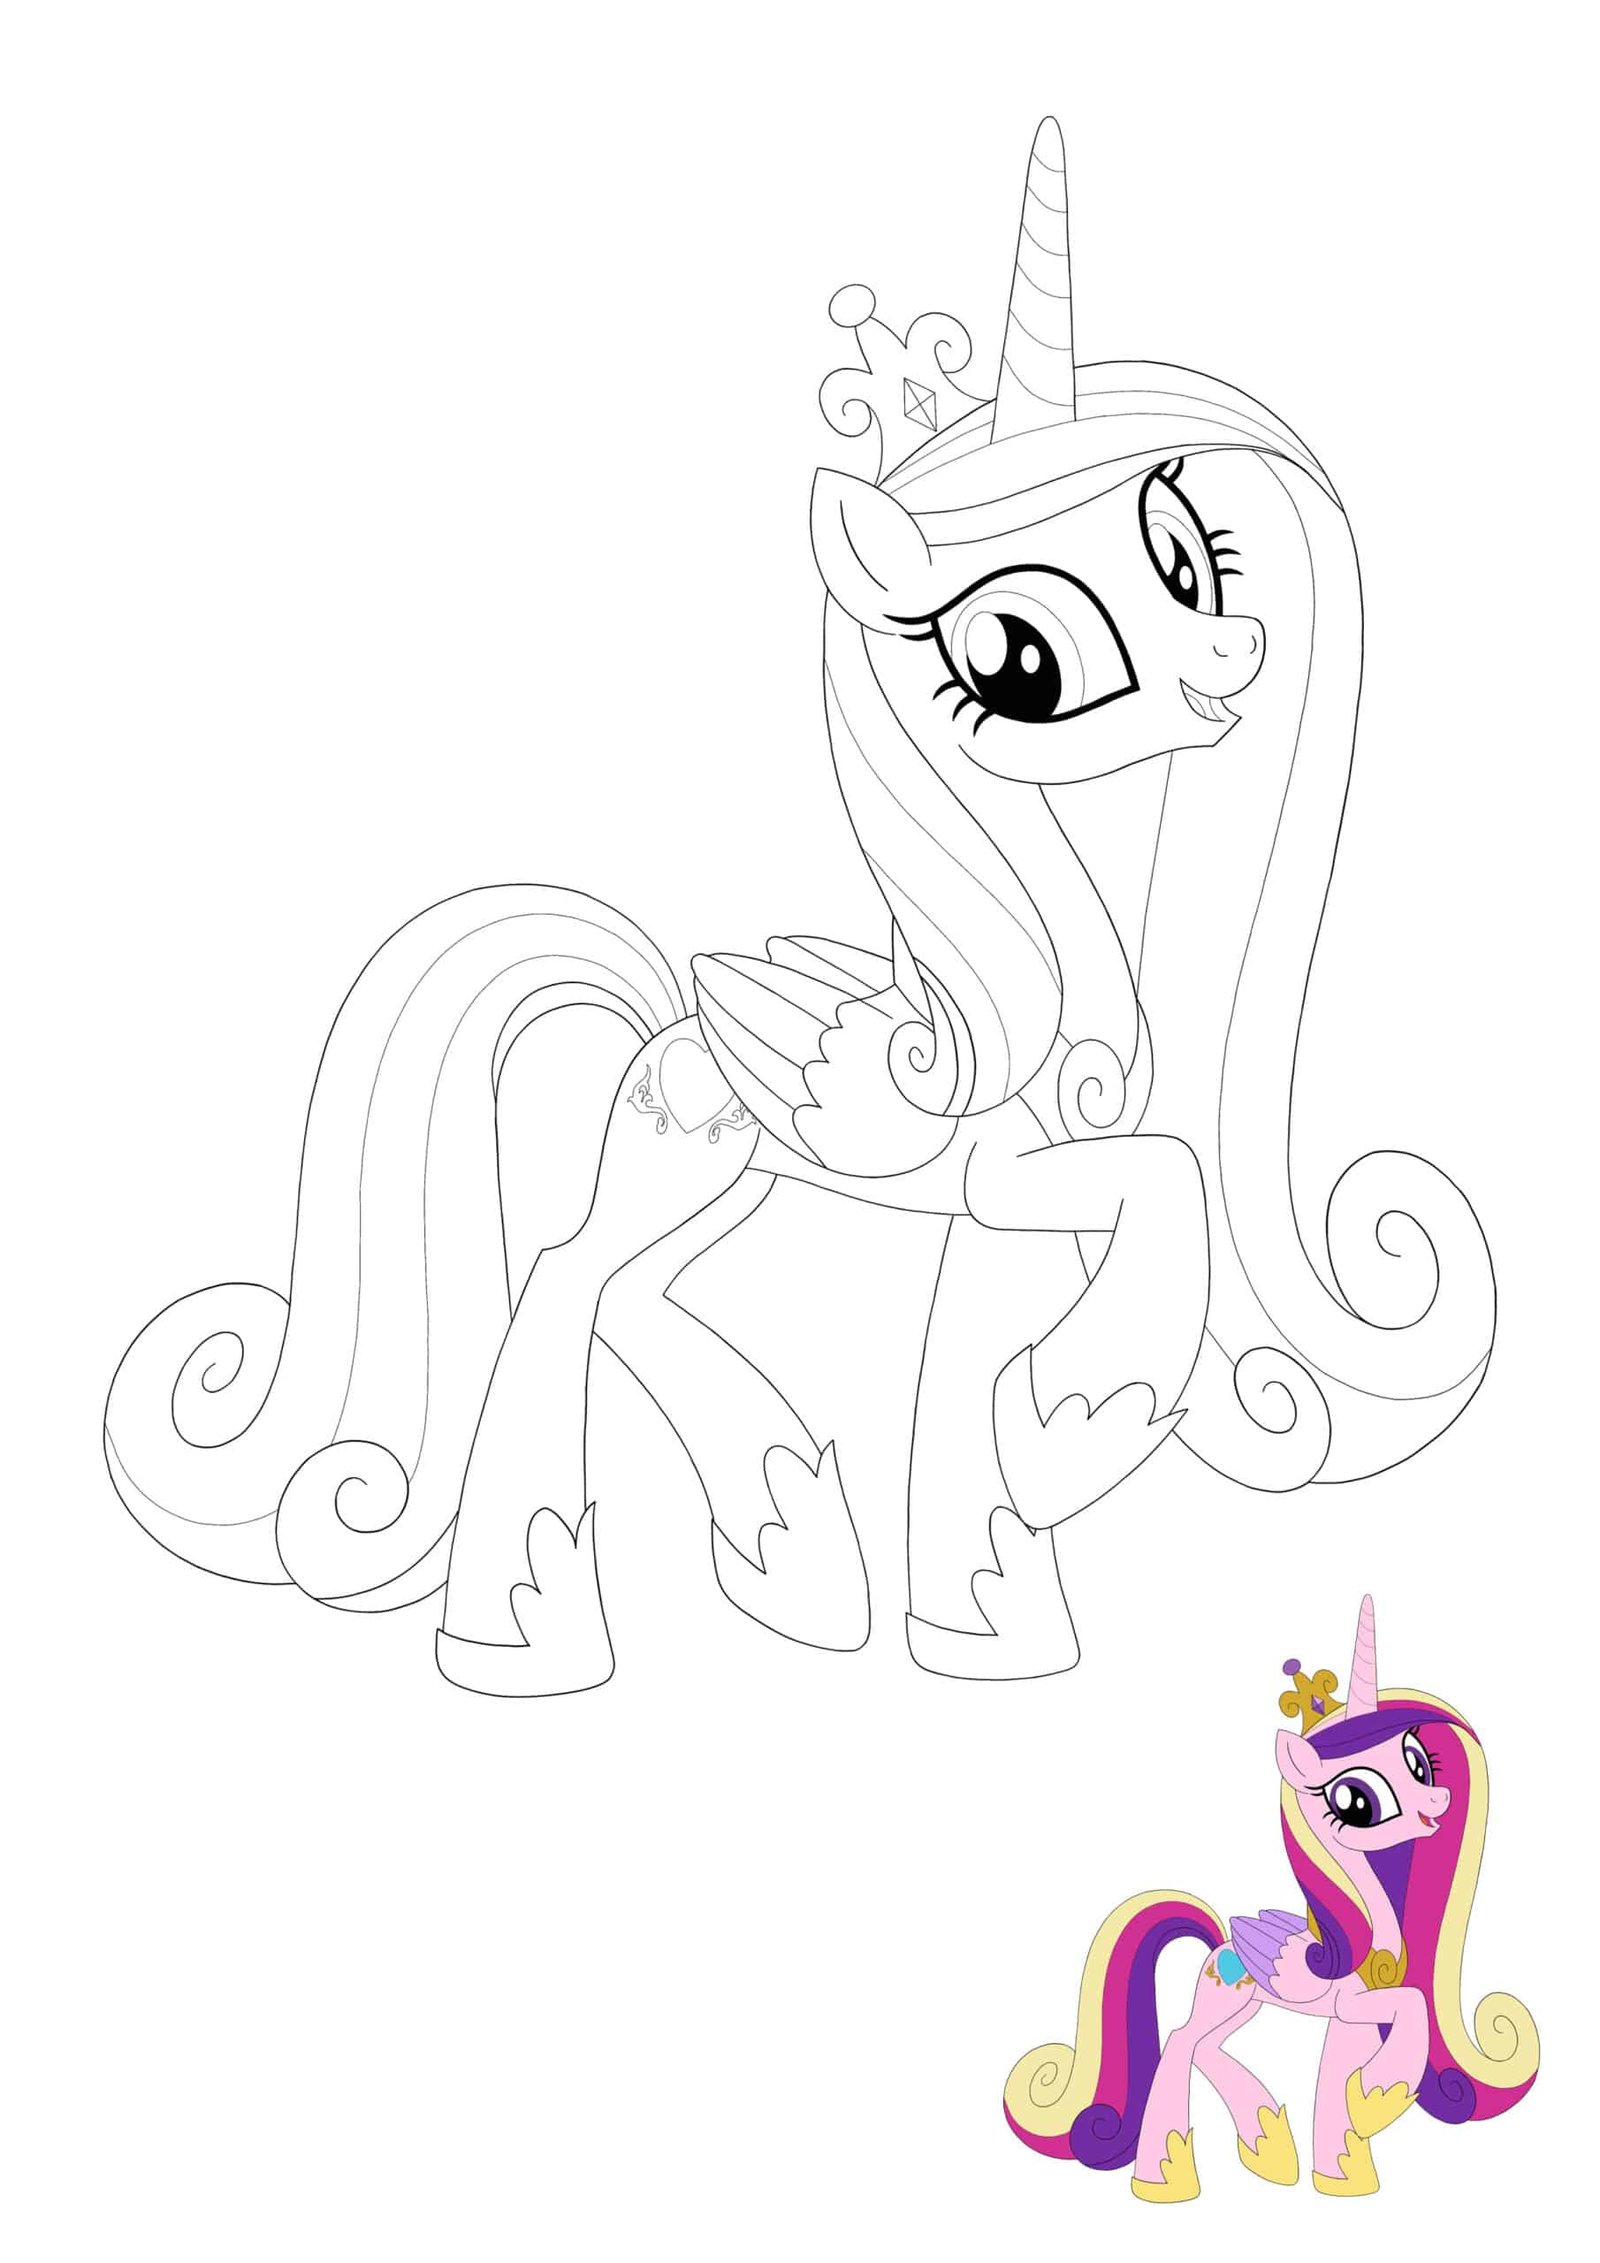 Princess Cadence coloring page with preview